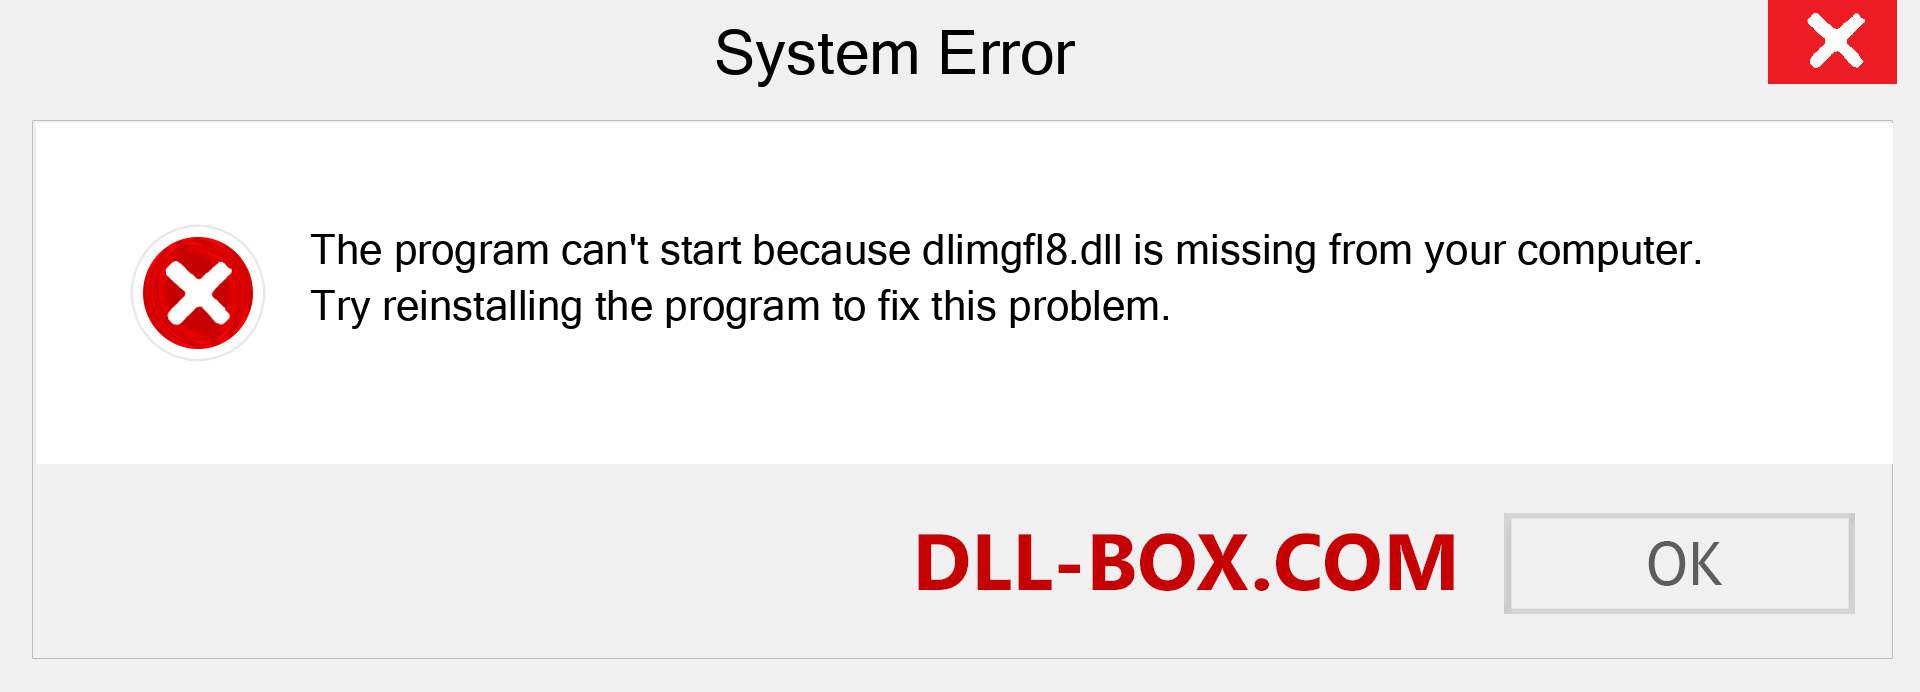  dlimgfl8.dll file is missing?. Download for Windows 7, 8, 10 - Fix  dlimgfl8 dll Missing Error on Windows, photos, images